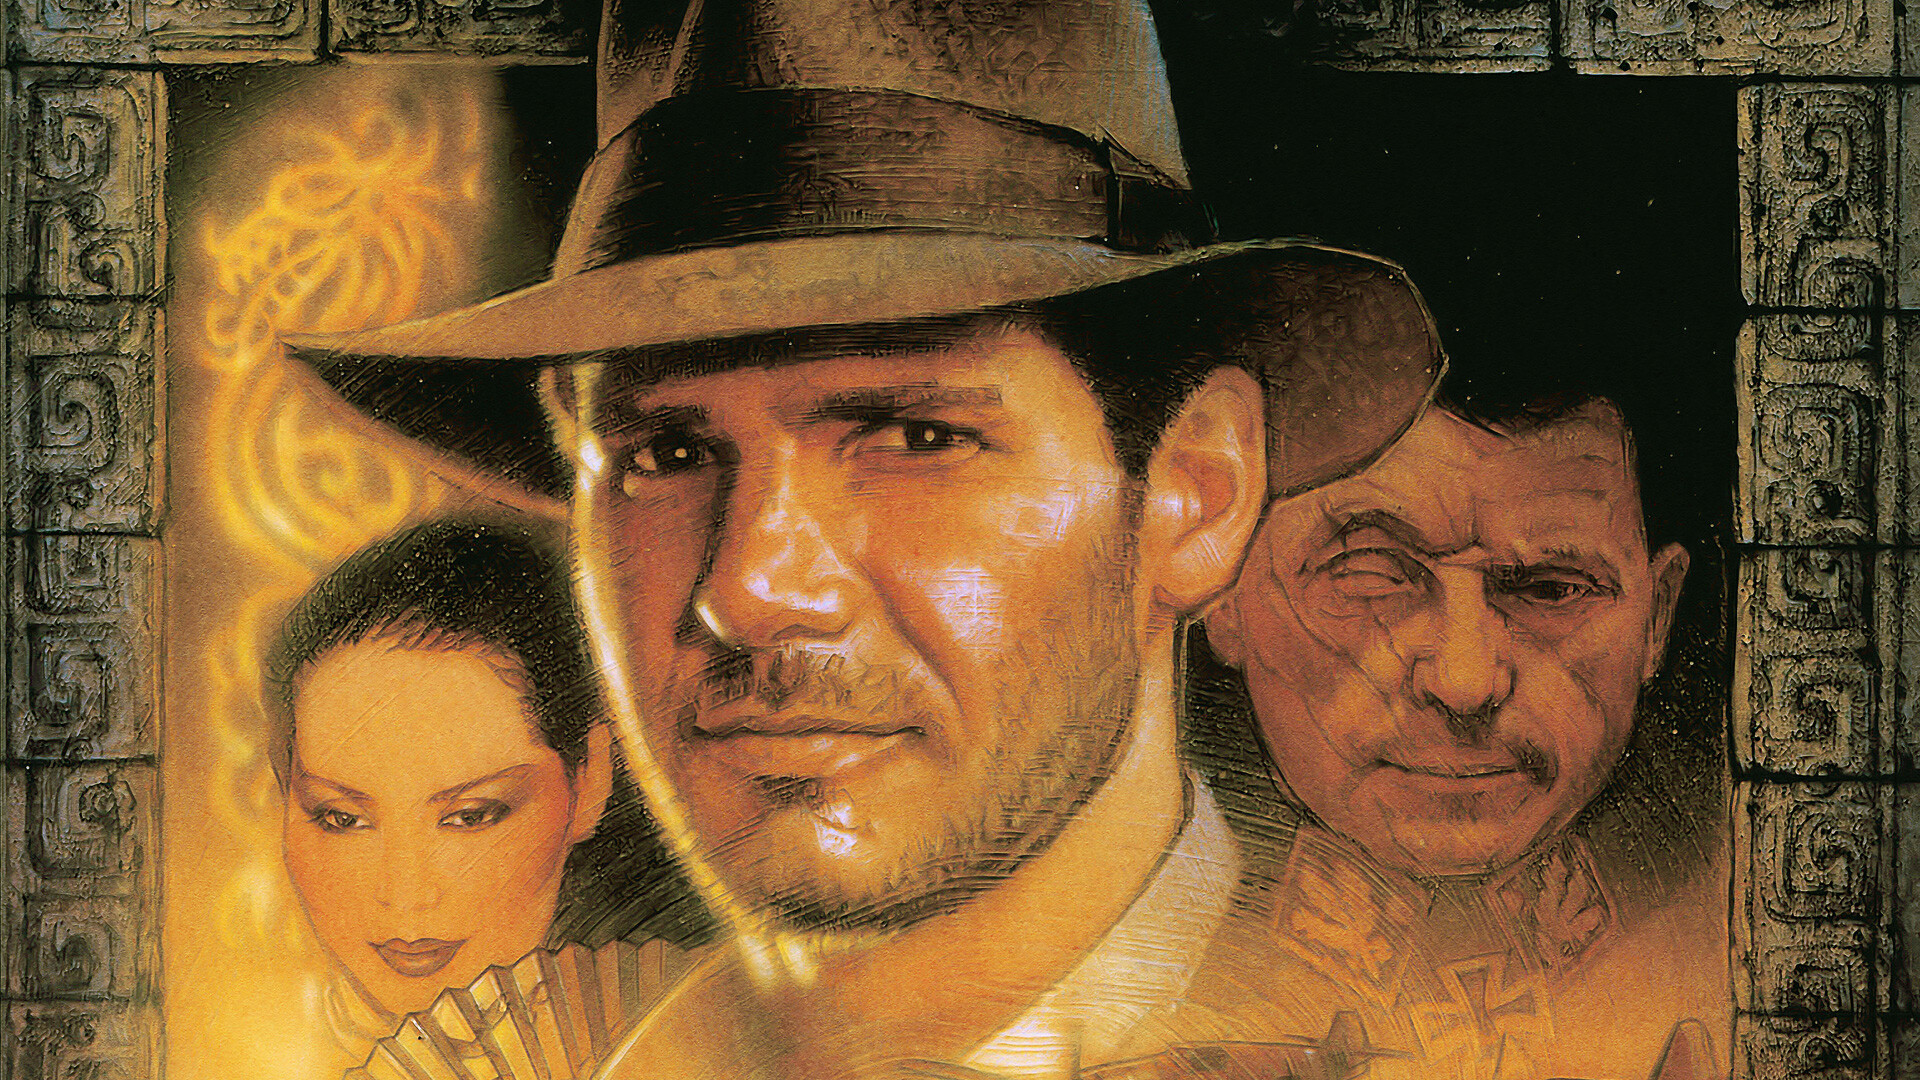 Indiana Jones: The Emperor's Tomb, A 2003 action-adventure video game developed by The Collective. 1920x1080 Full HD Wallpaper.